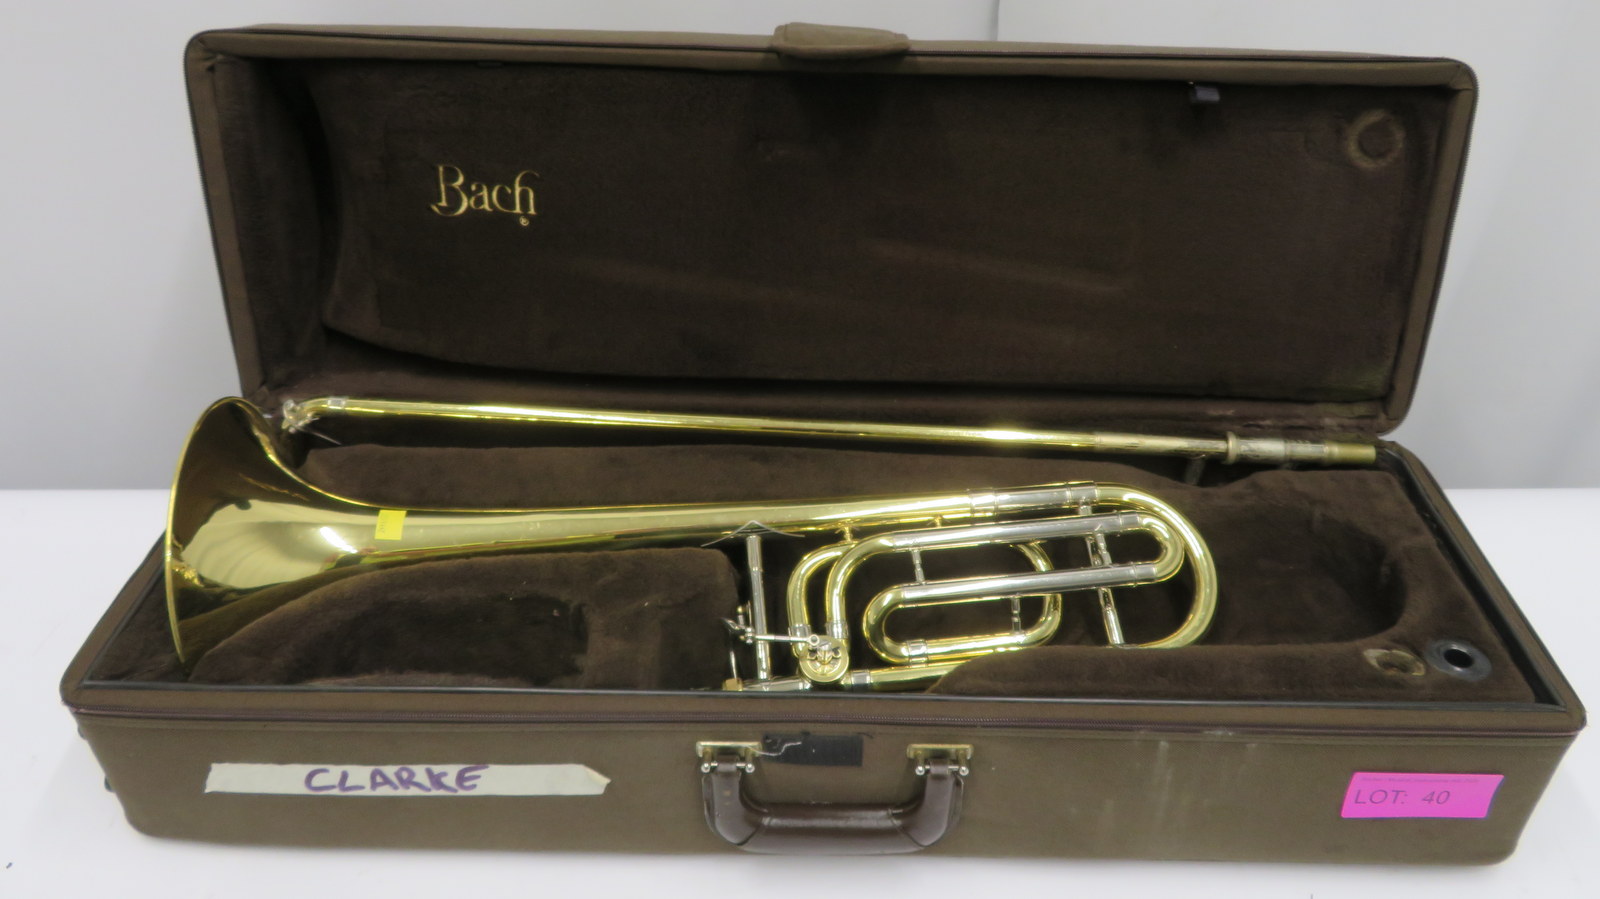 Bach Stradivarius model 42 trombone with case. Serial number: 41064.